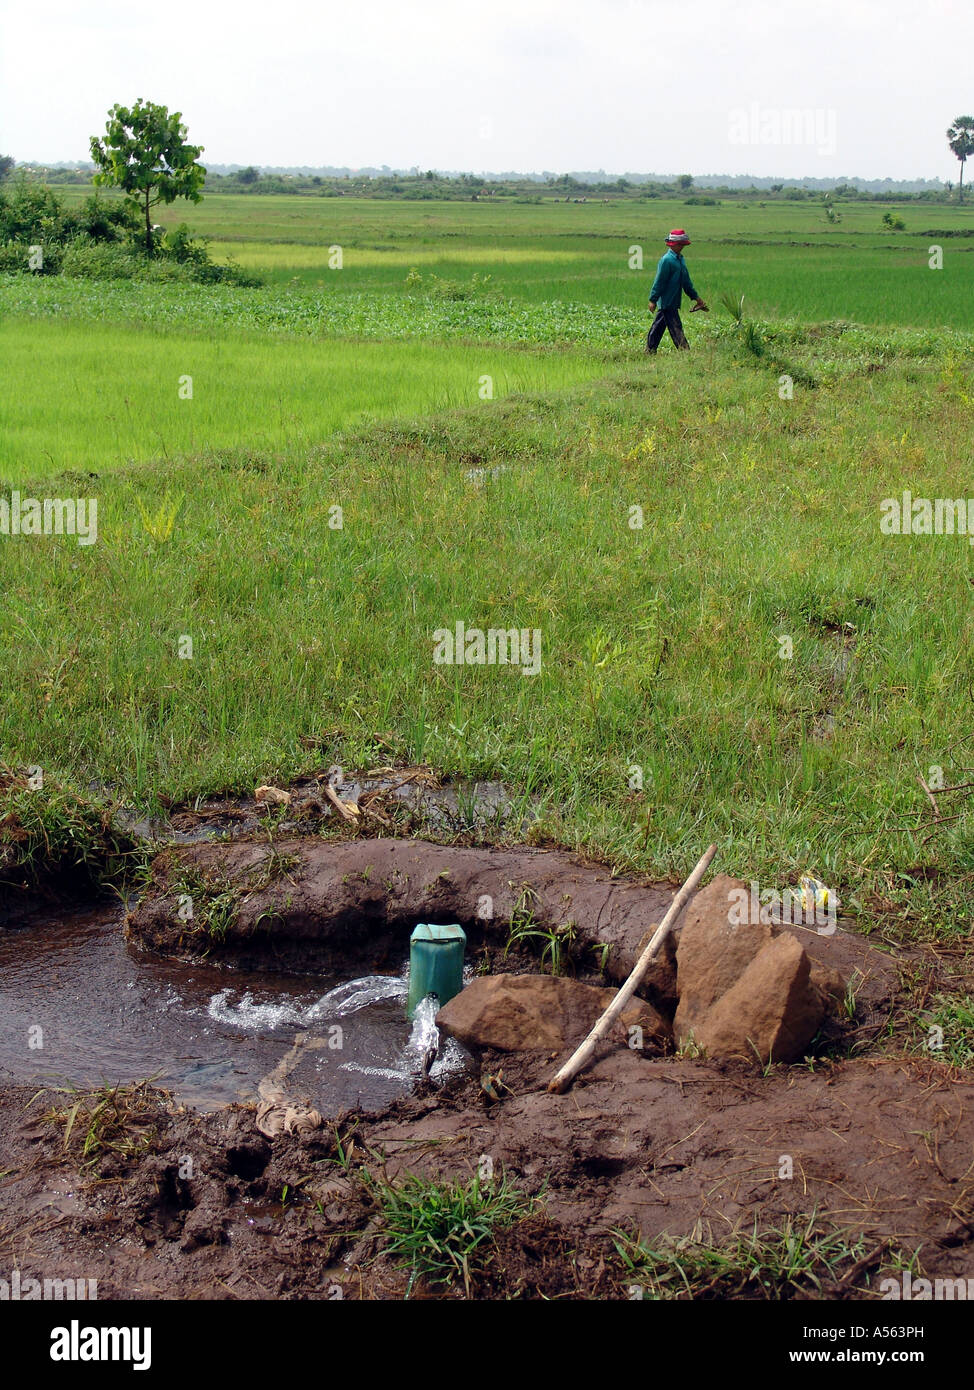 Page 10 - Irrigation Agronomy High Resolution Stock Photography and Images  - Alamy